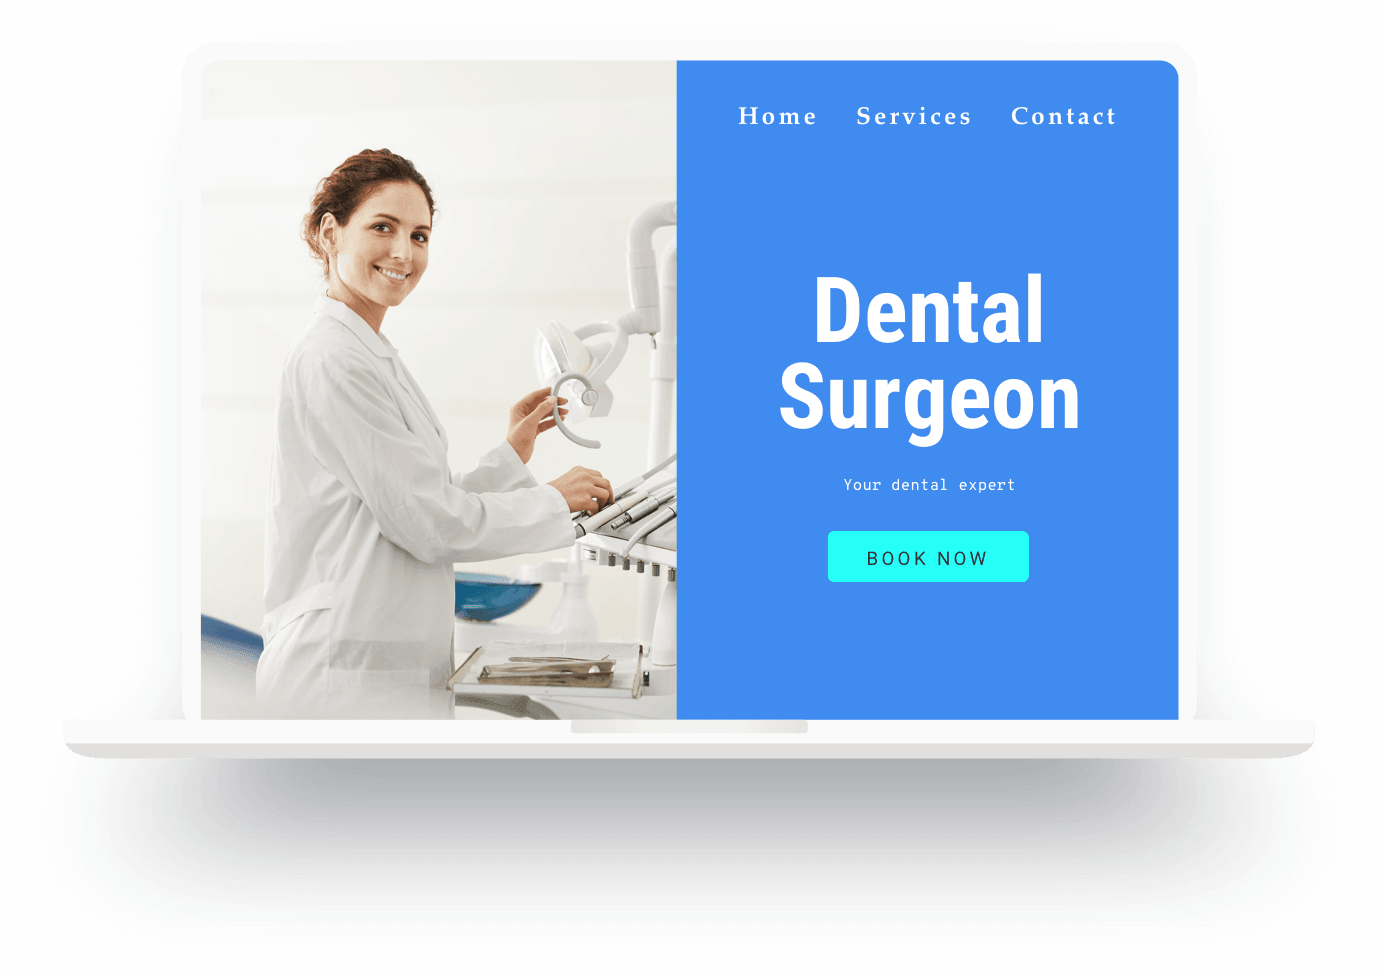 Example of a dental surgeon's website built with Jimdo